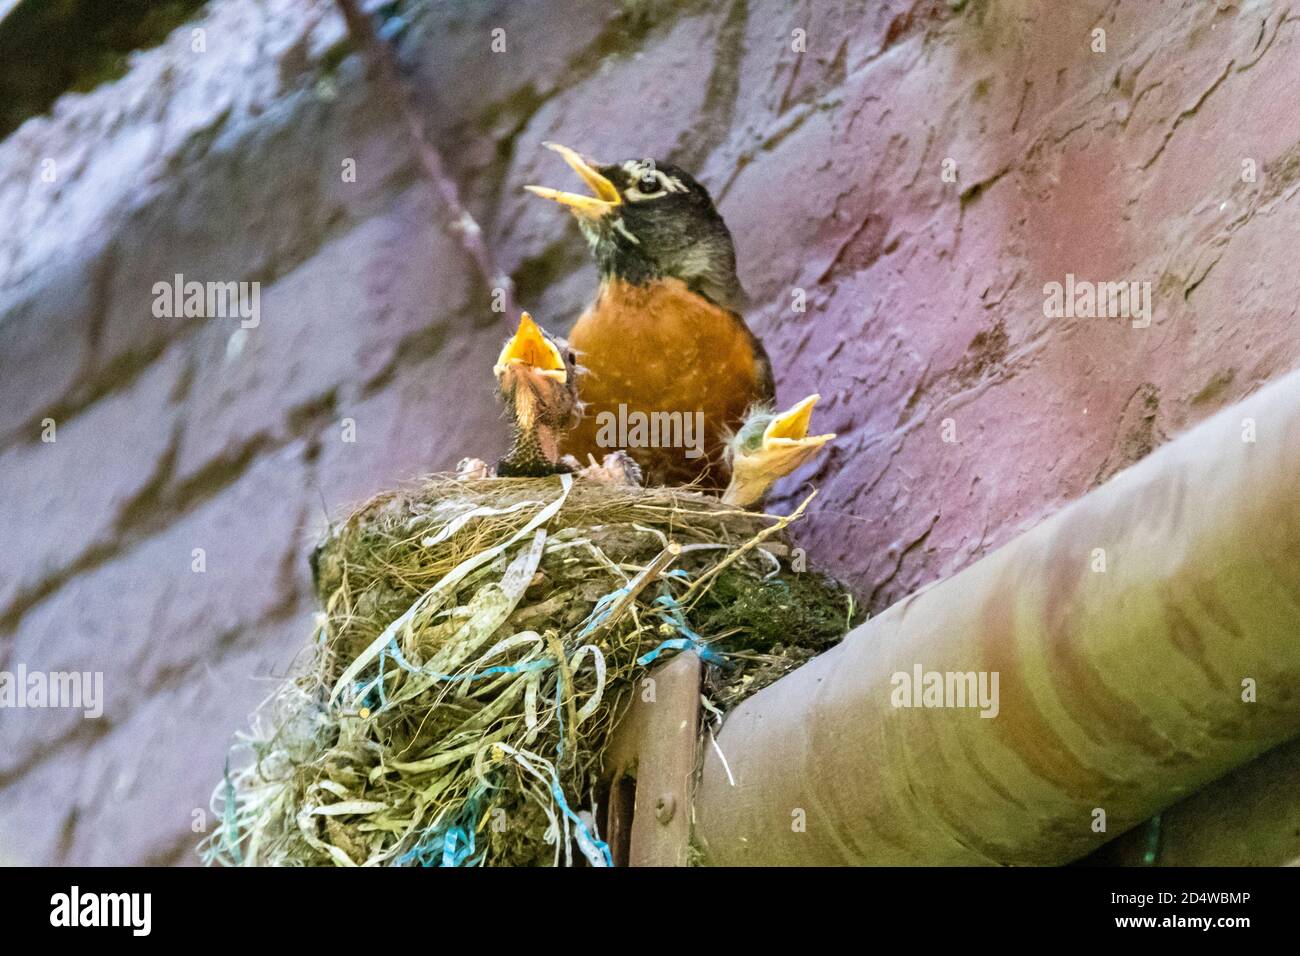 Adult American Robin, Turdus migratorius, with three chicks in nest, appearing to sing with beaks open, New York City, USA Stock Photo